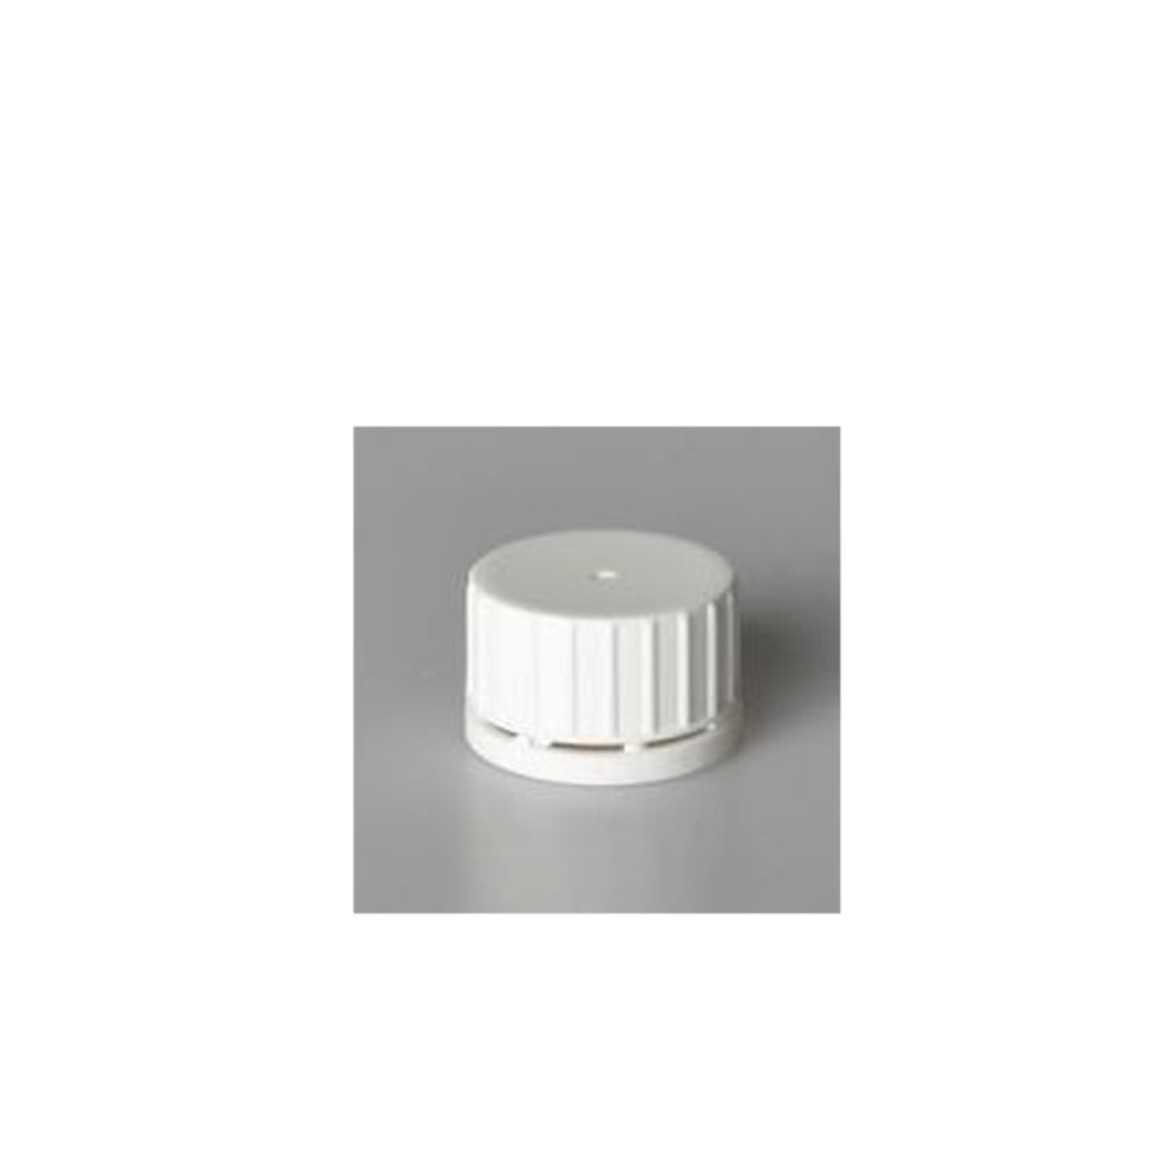 Beauty product packaging ribbed black plastic caps for plastic bottles container body and face product